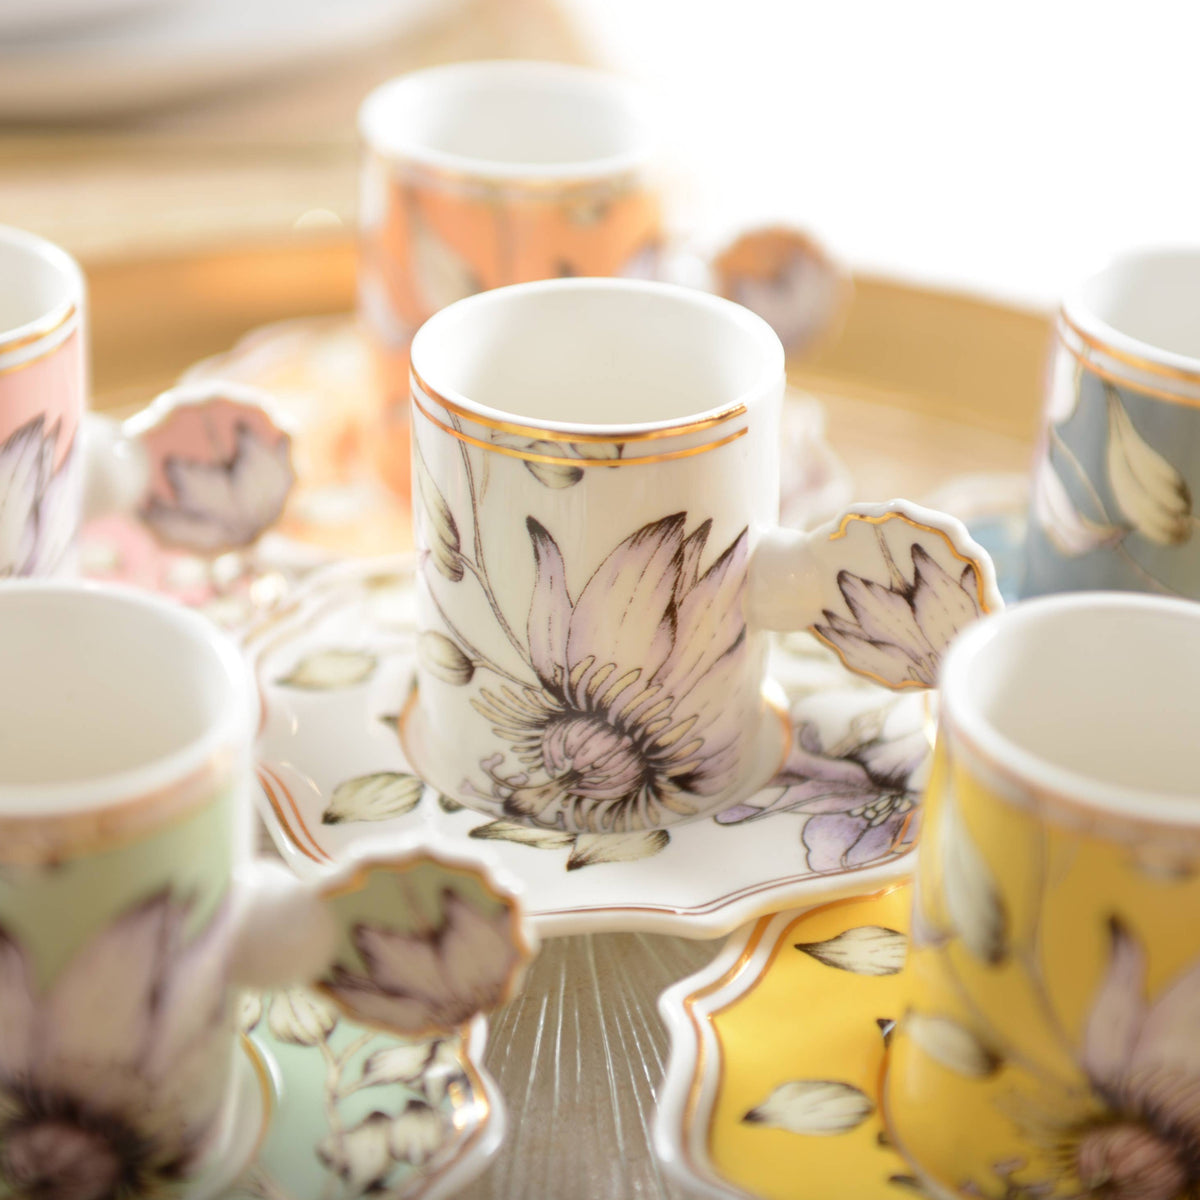 SET OF 6 FLORAL COFFEE CUPS AND SAUCERS - Holistic Habitat 